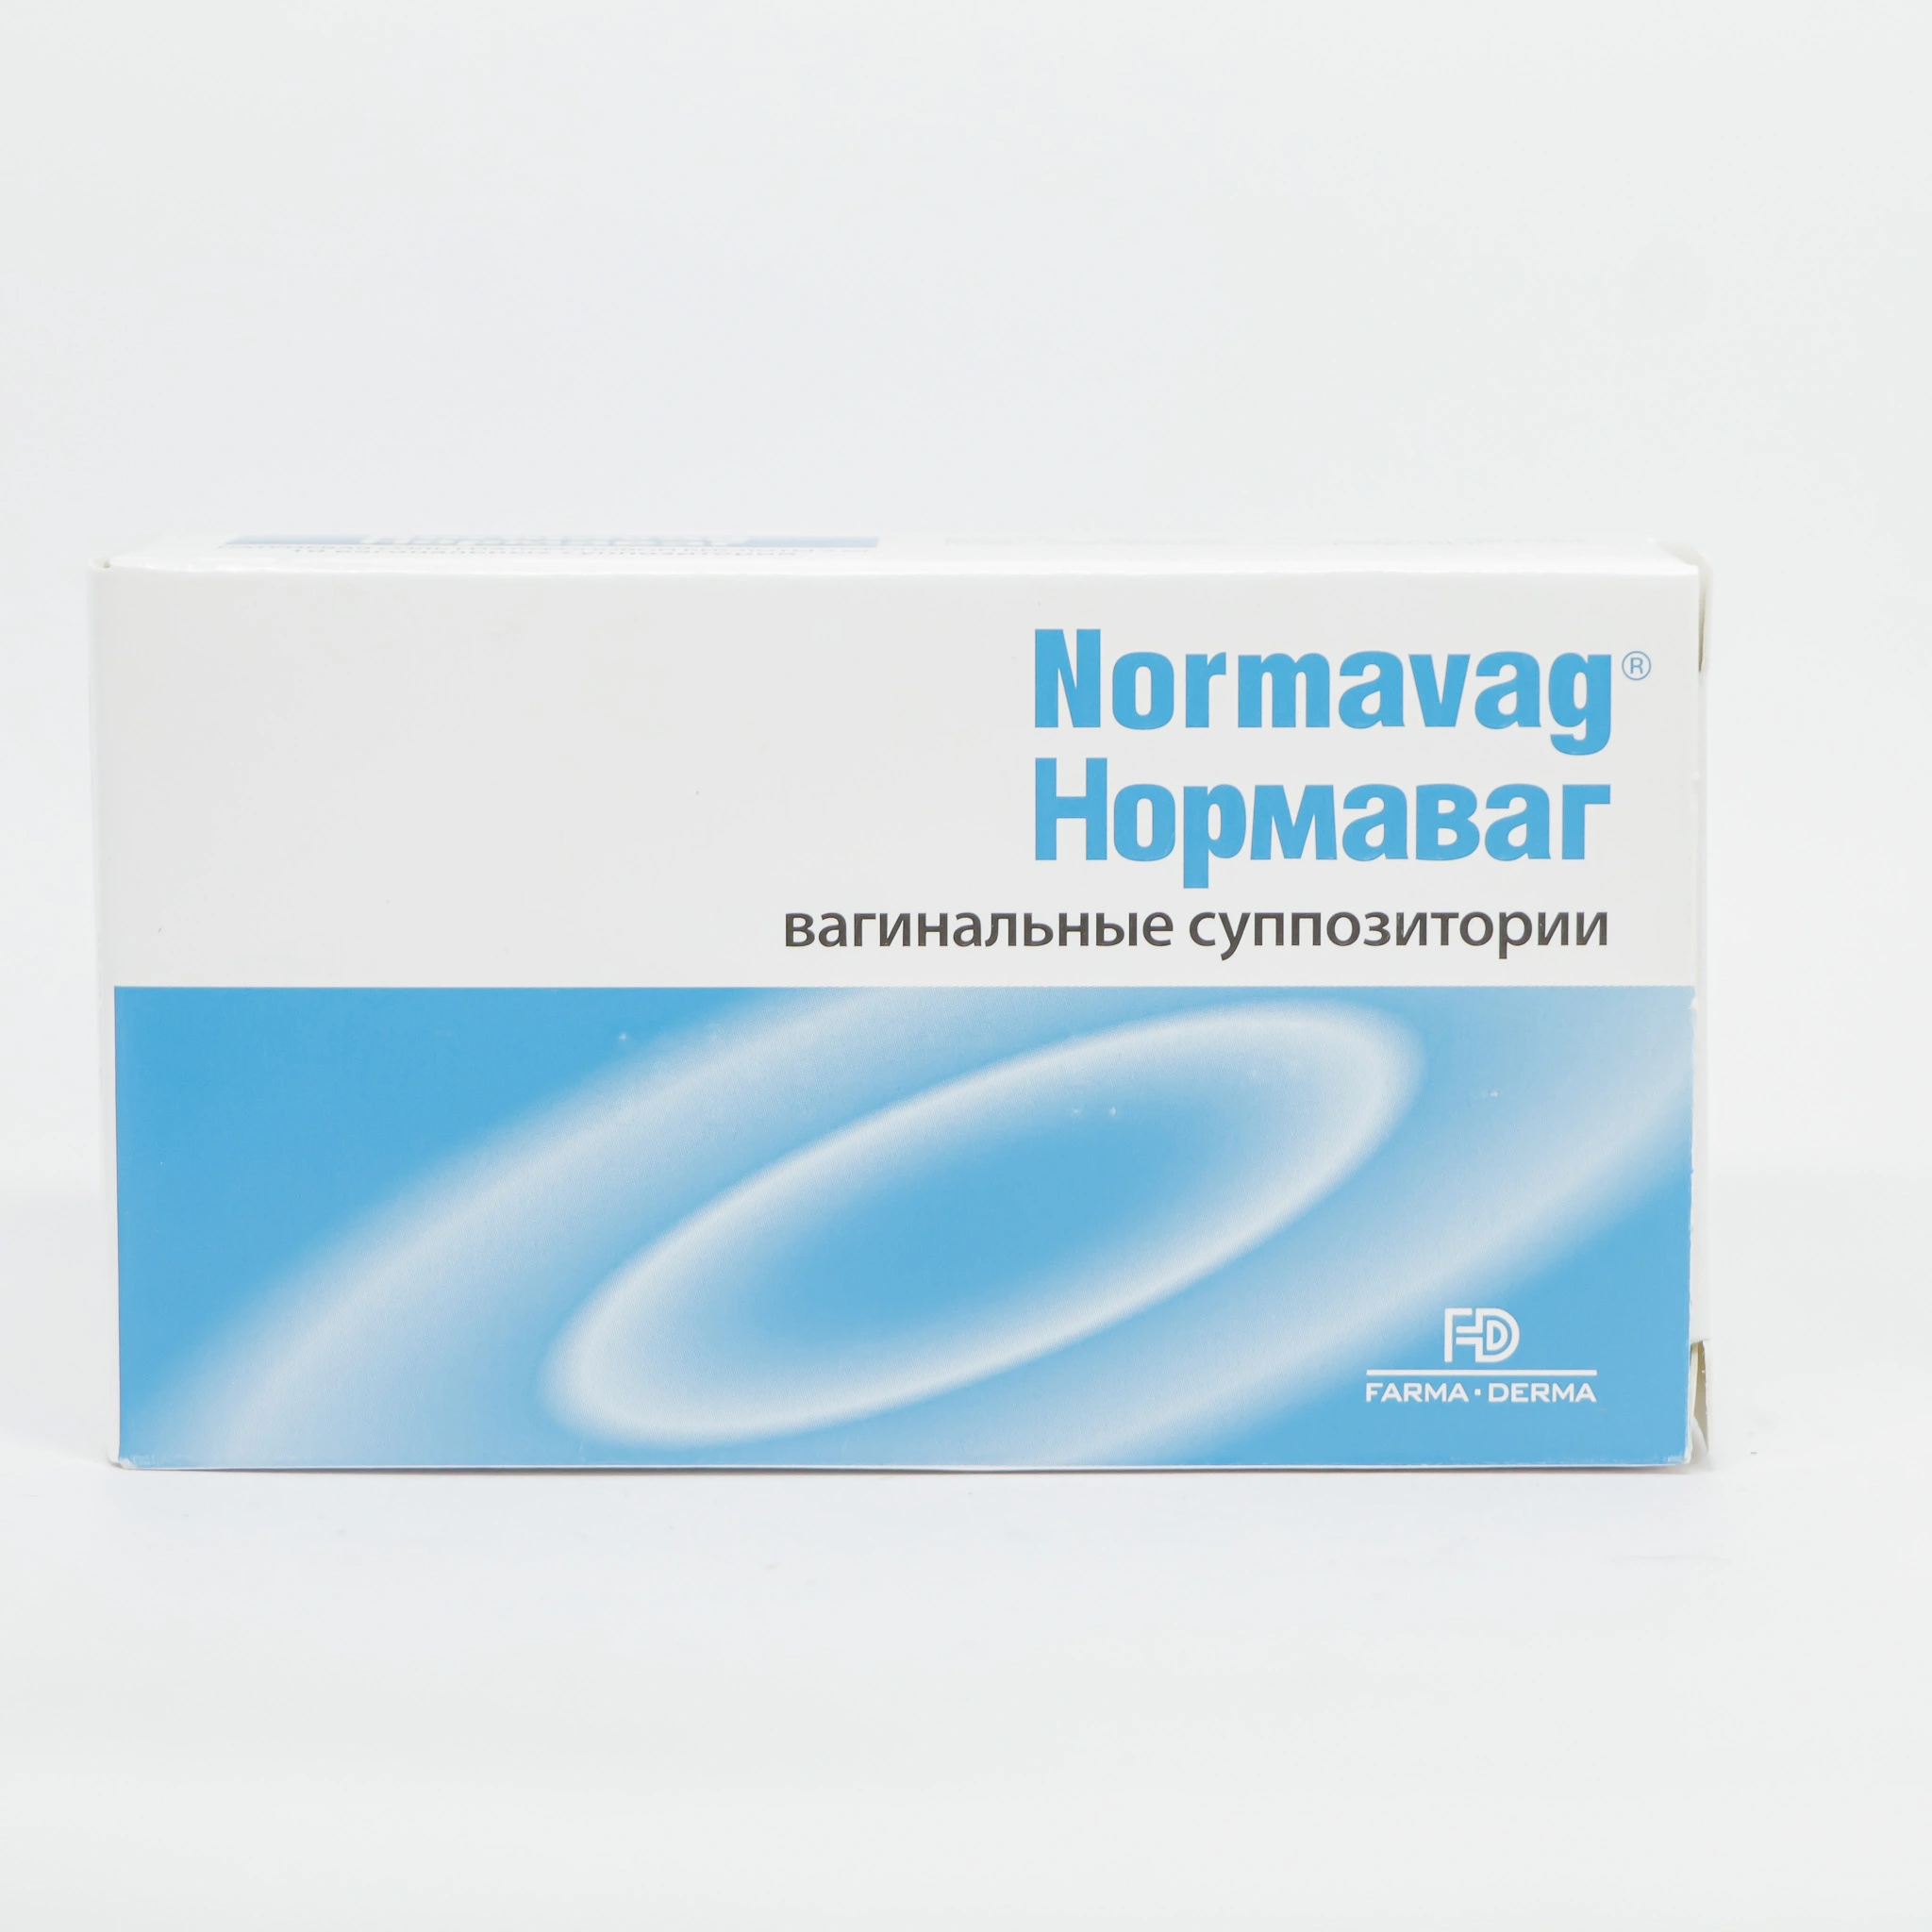 Normavag 5 mg № 10 (Suppositories) (Italy)